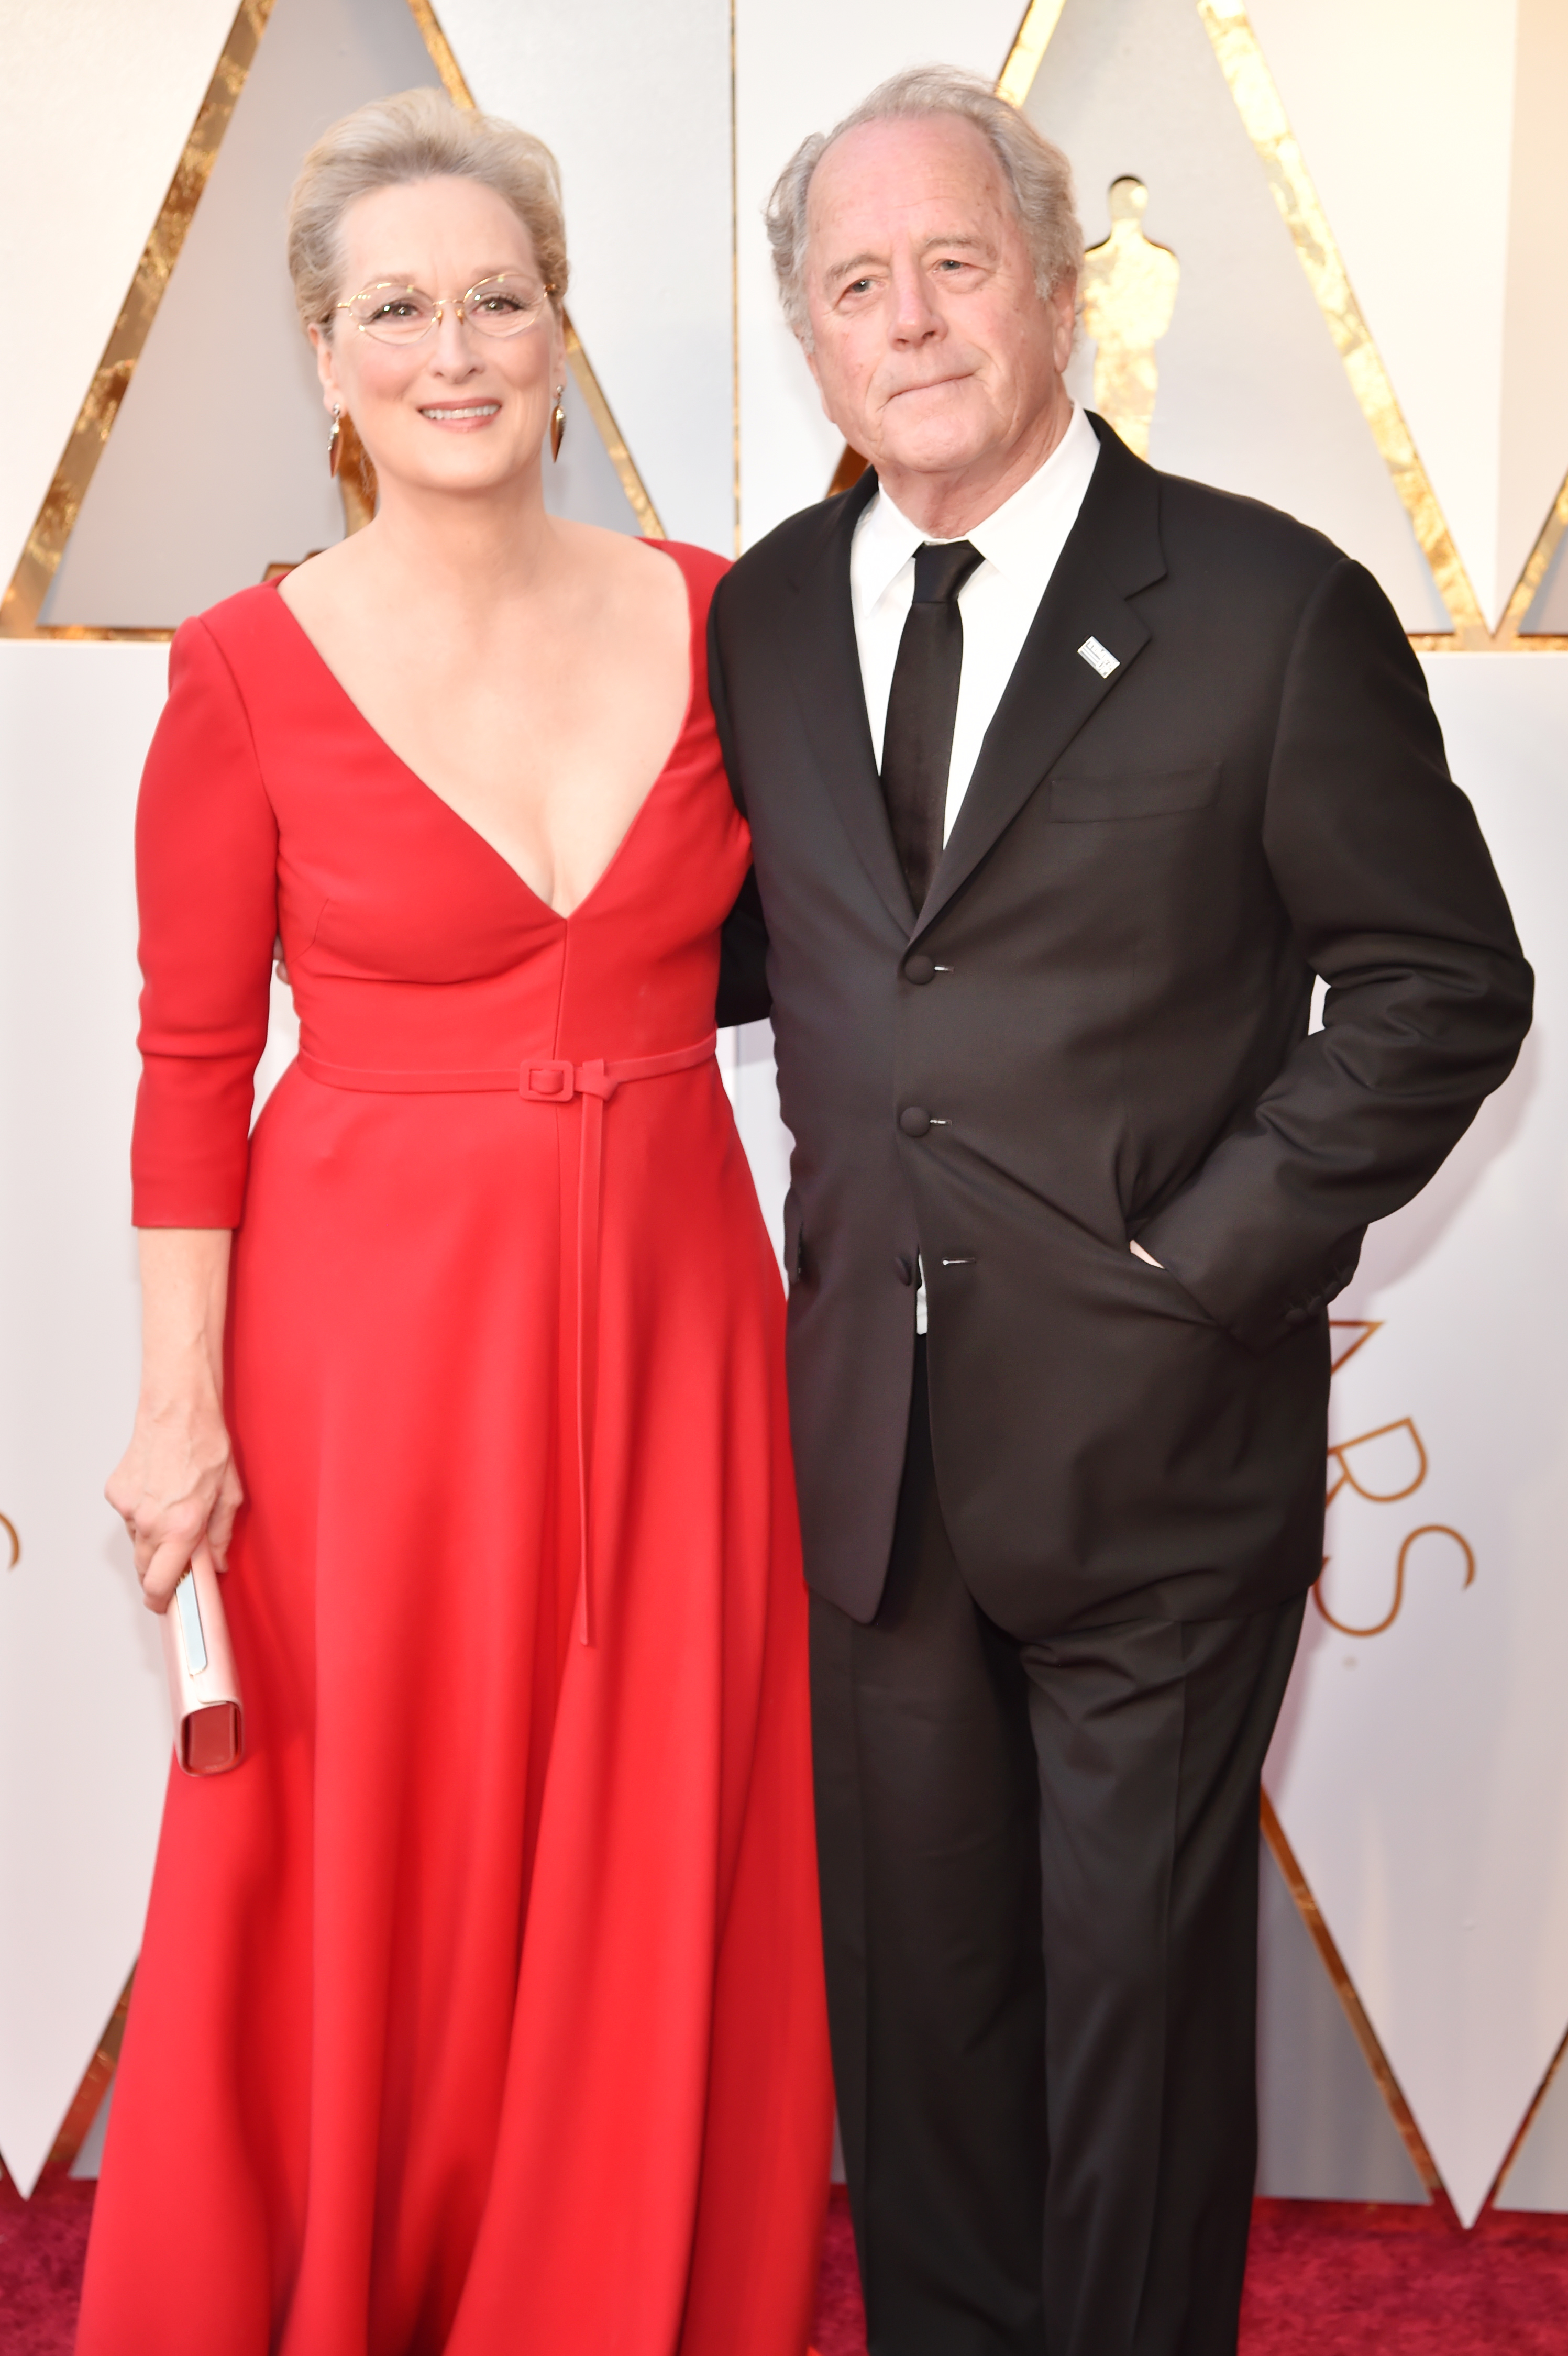 Meryl Streep and Don Gummer attend the 90th Annual Academy Awards at Hollywood & Highland Center in Hollywood, California, on March 4, 2018. | Source: Getty Images